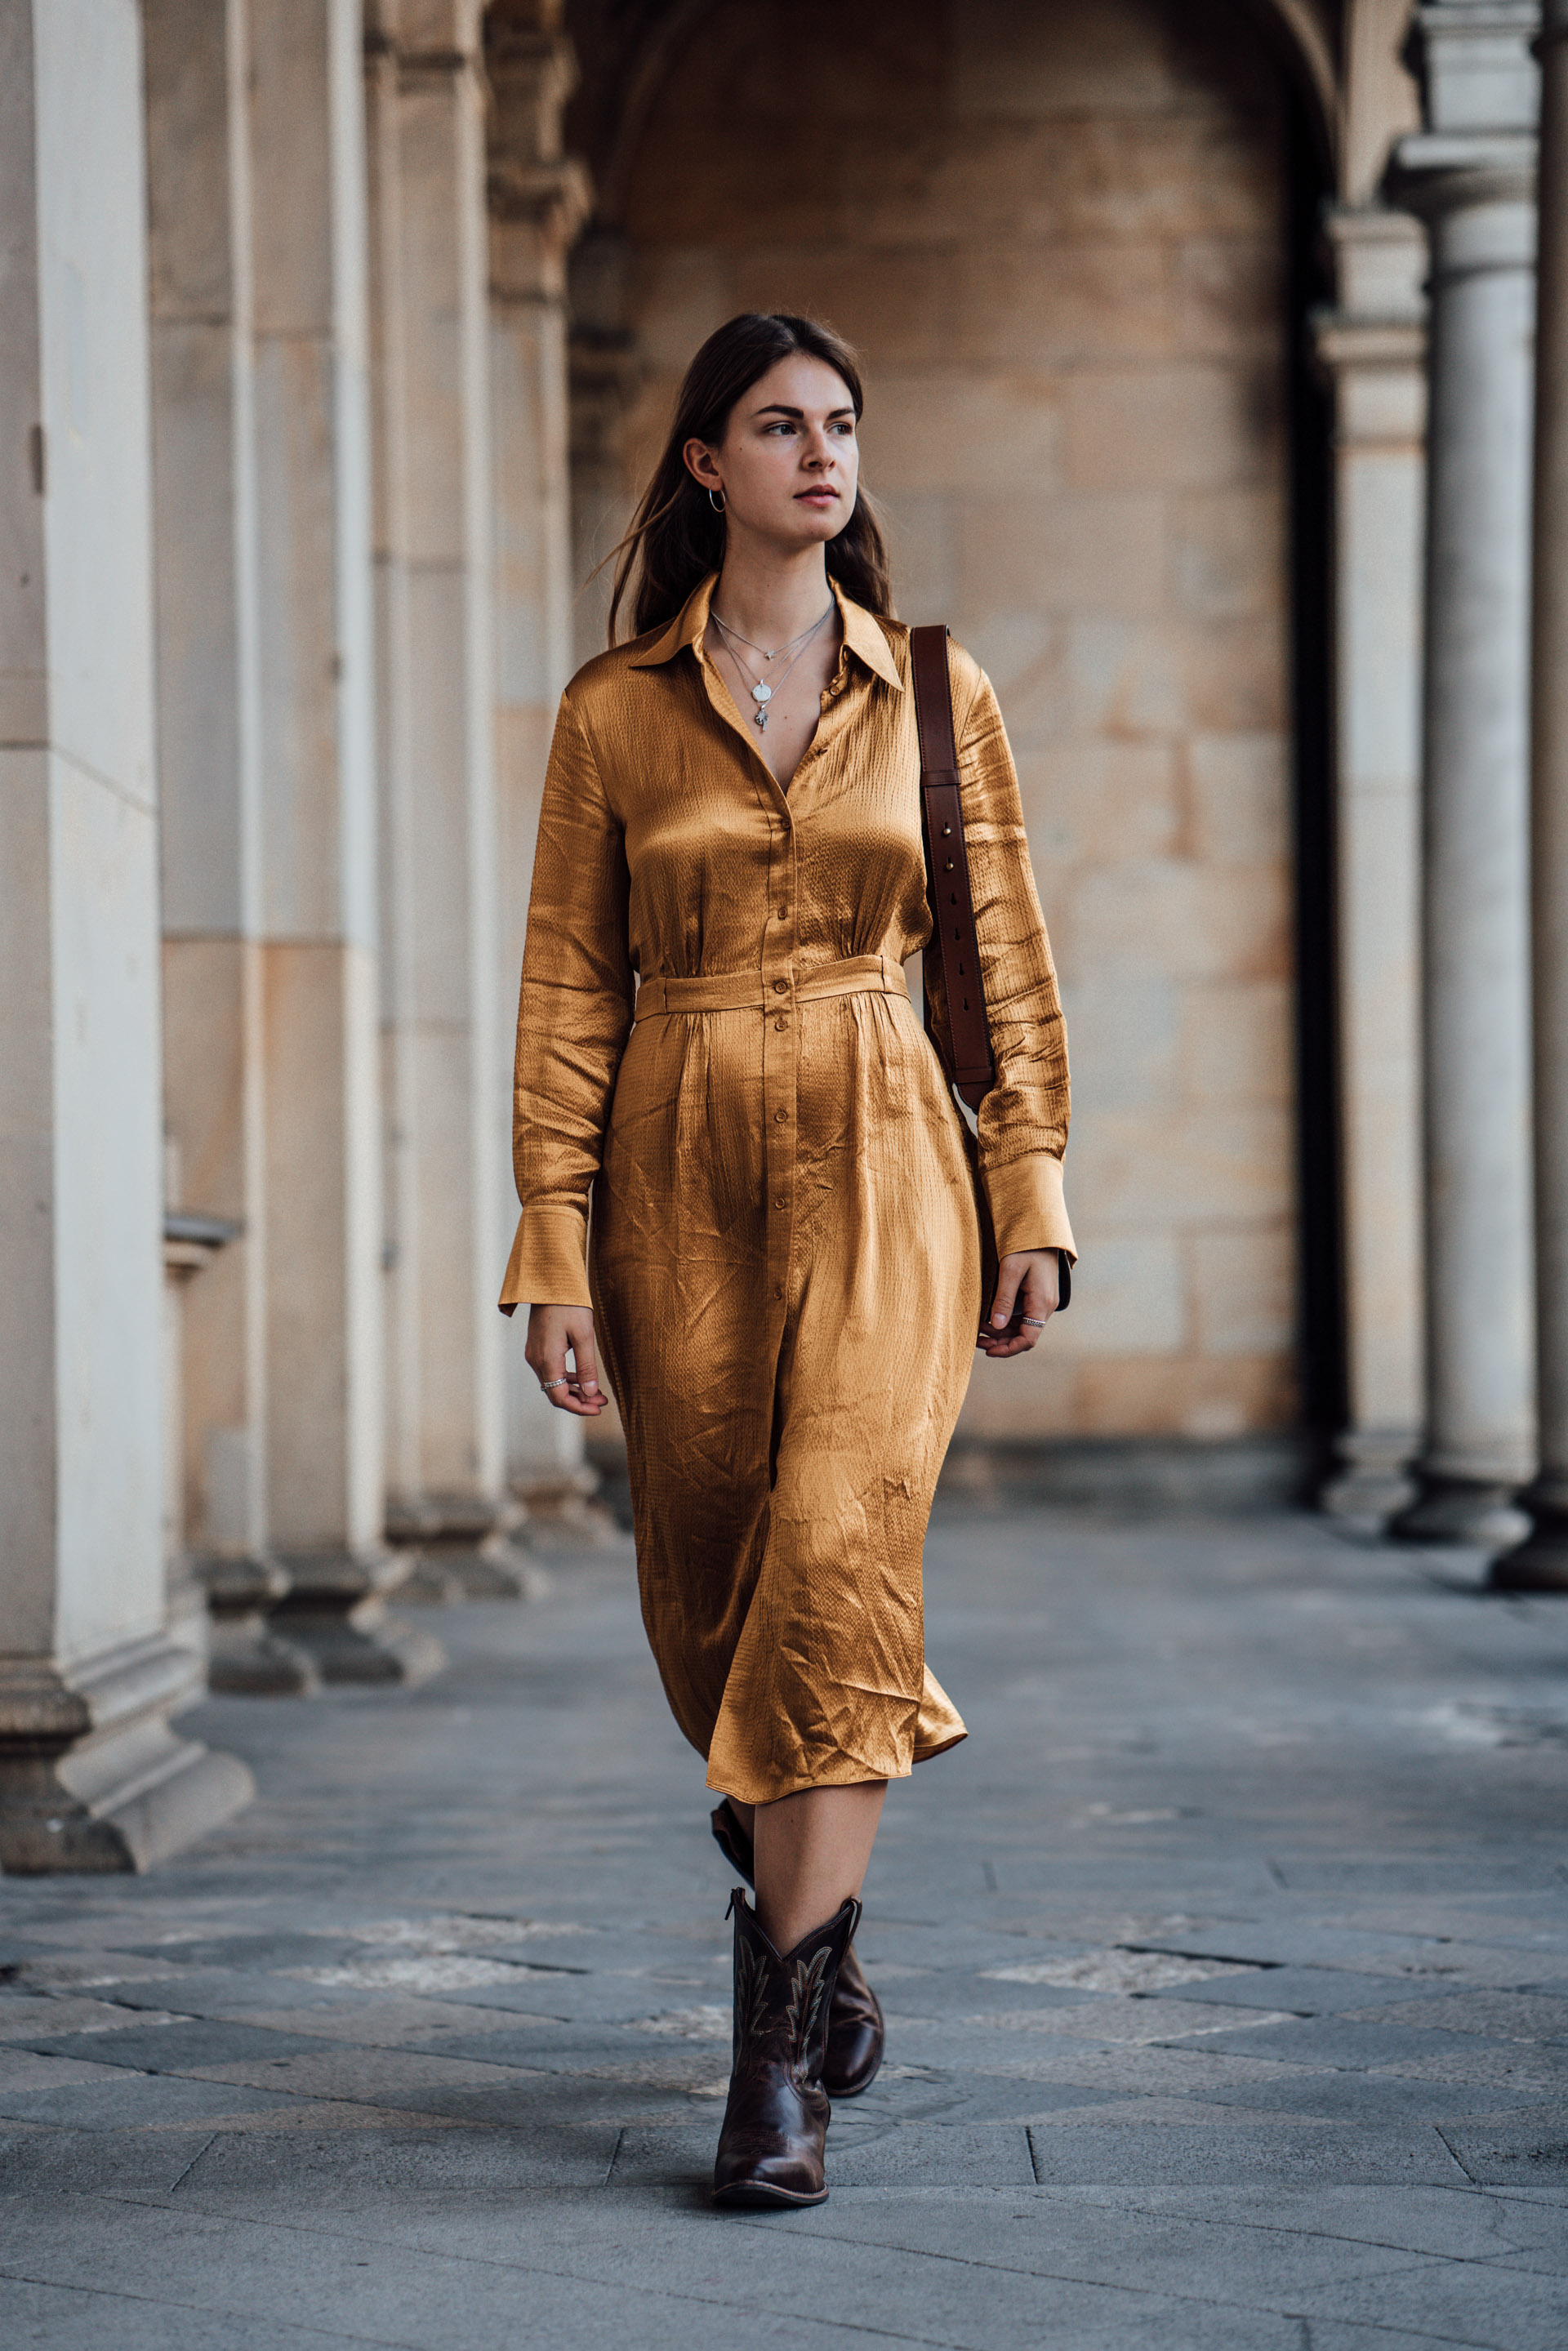 midi dress with boots